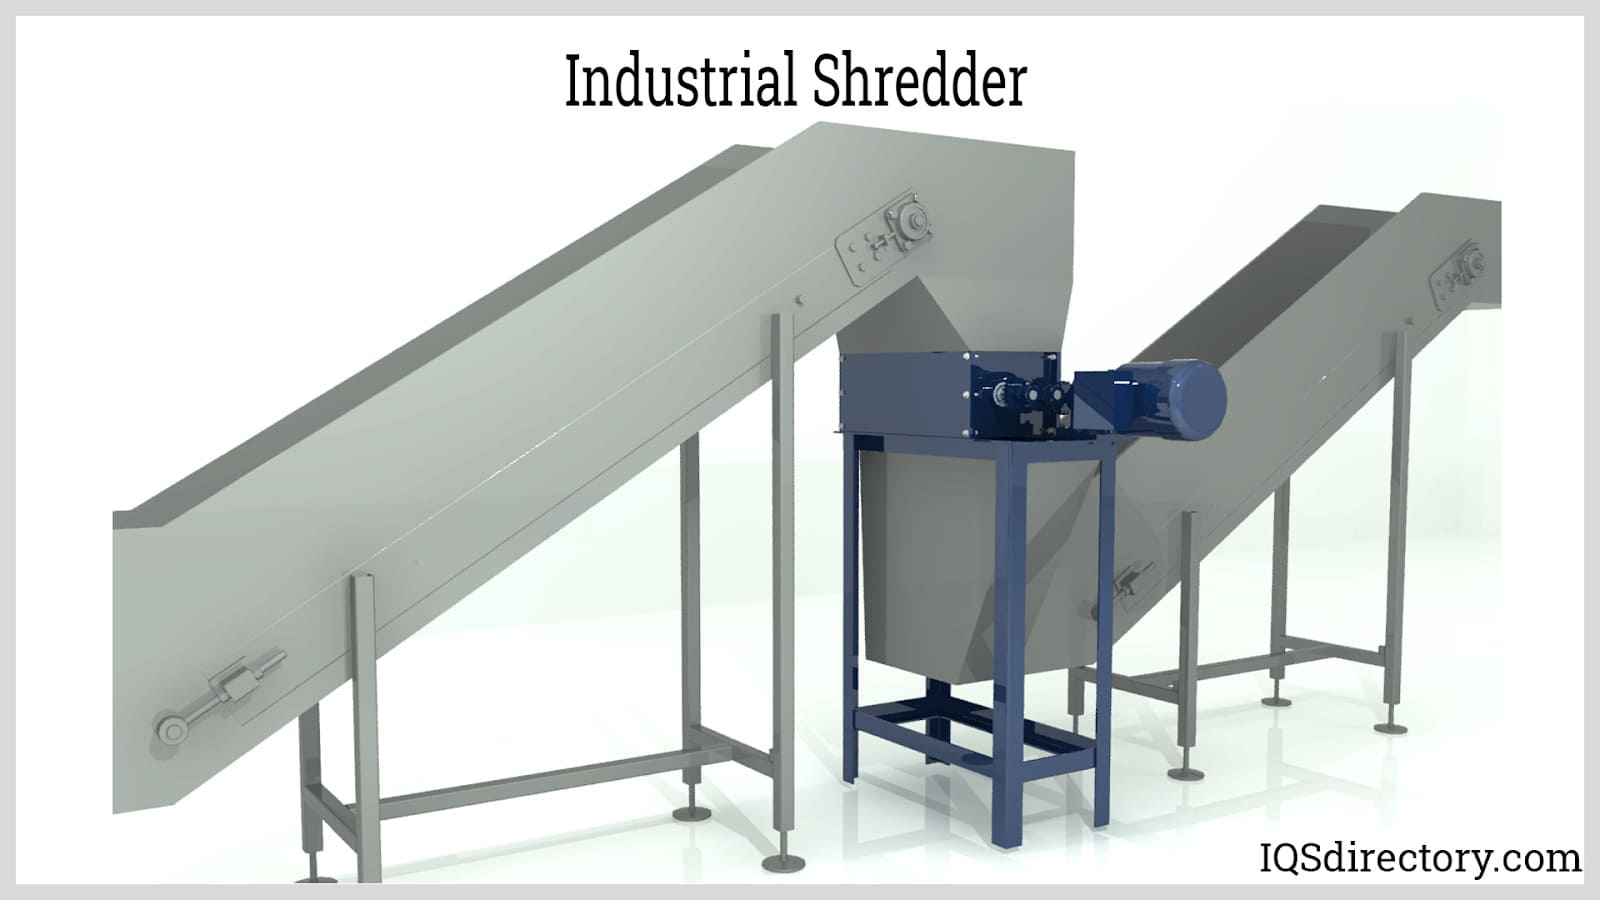 Looking for all possibilities for uses of the slicer/shredder and